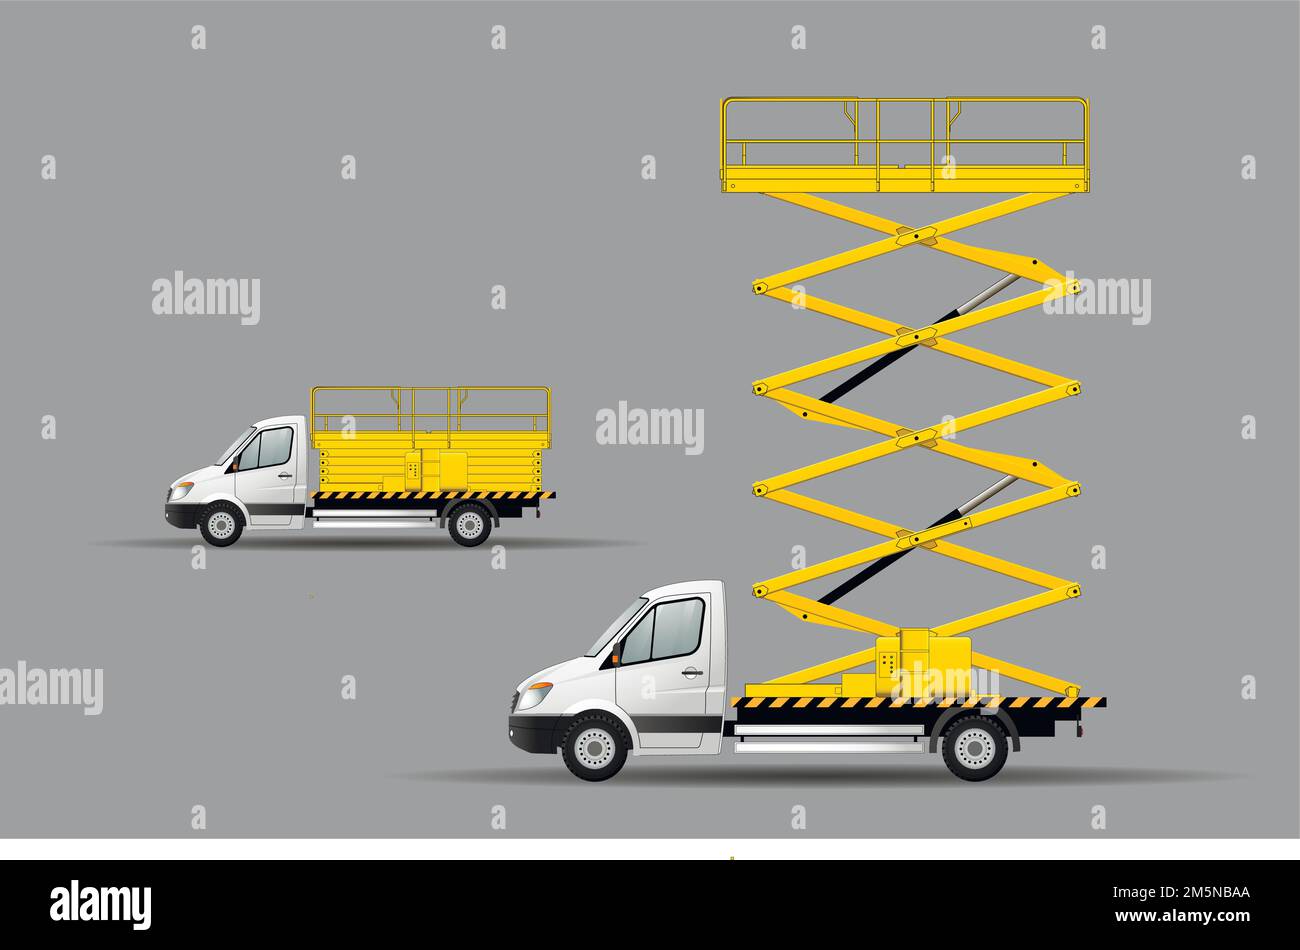 A set of vector images of a scissor lift on a car chassis in transport and working position. Stock Vector